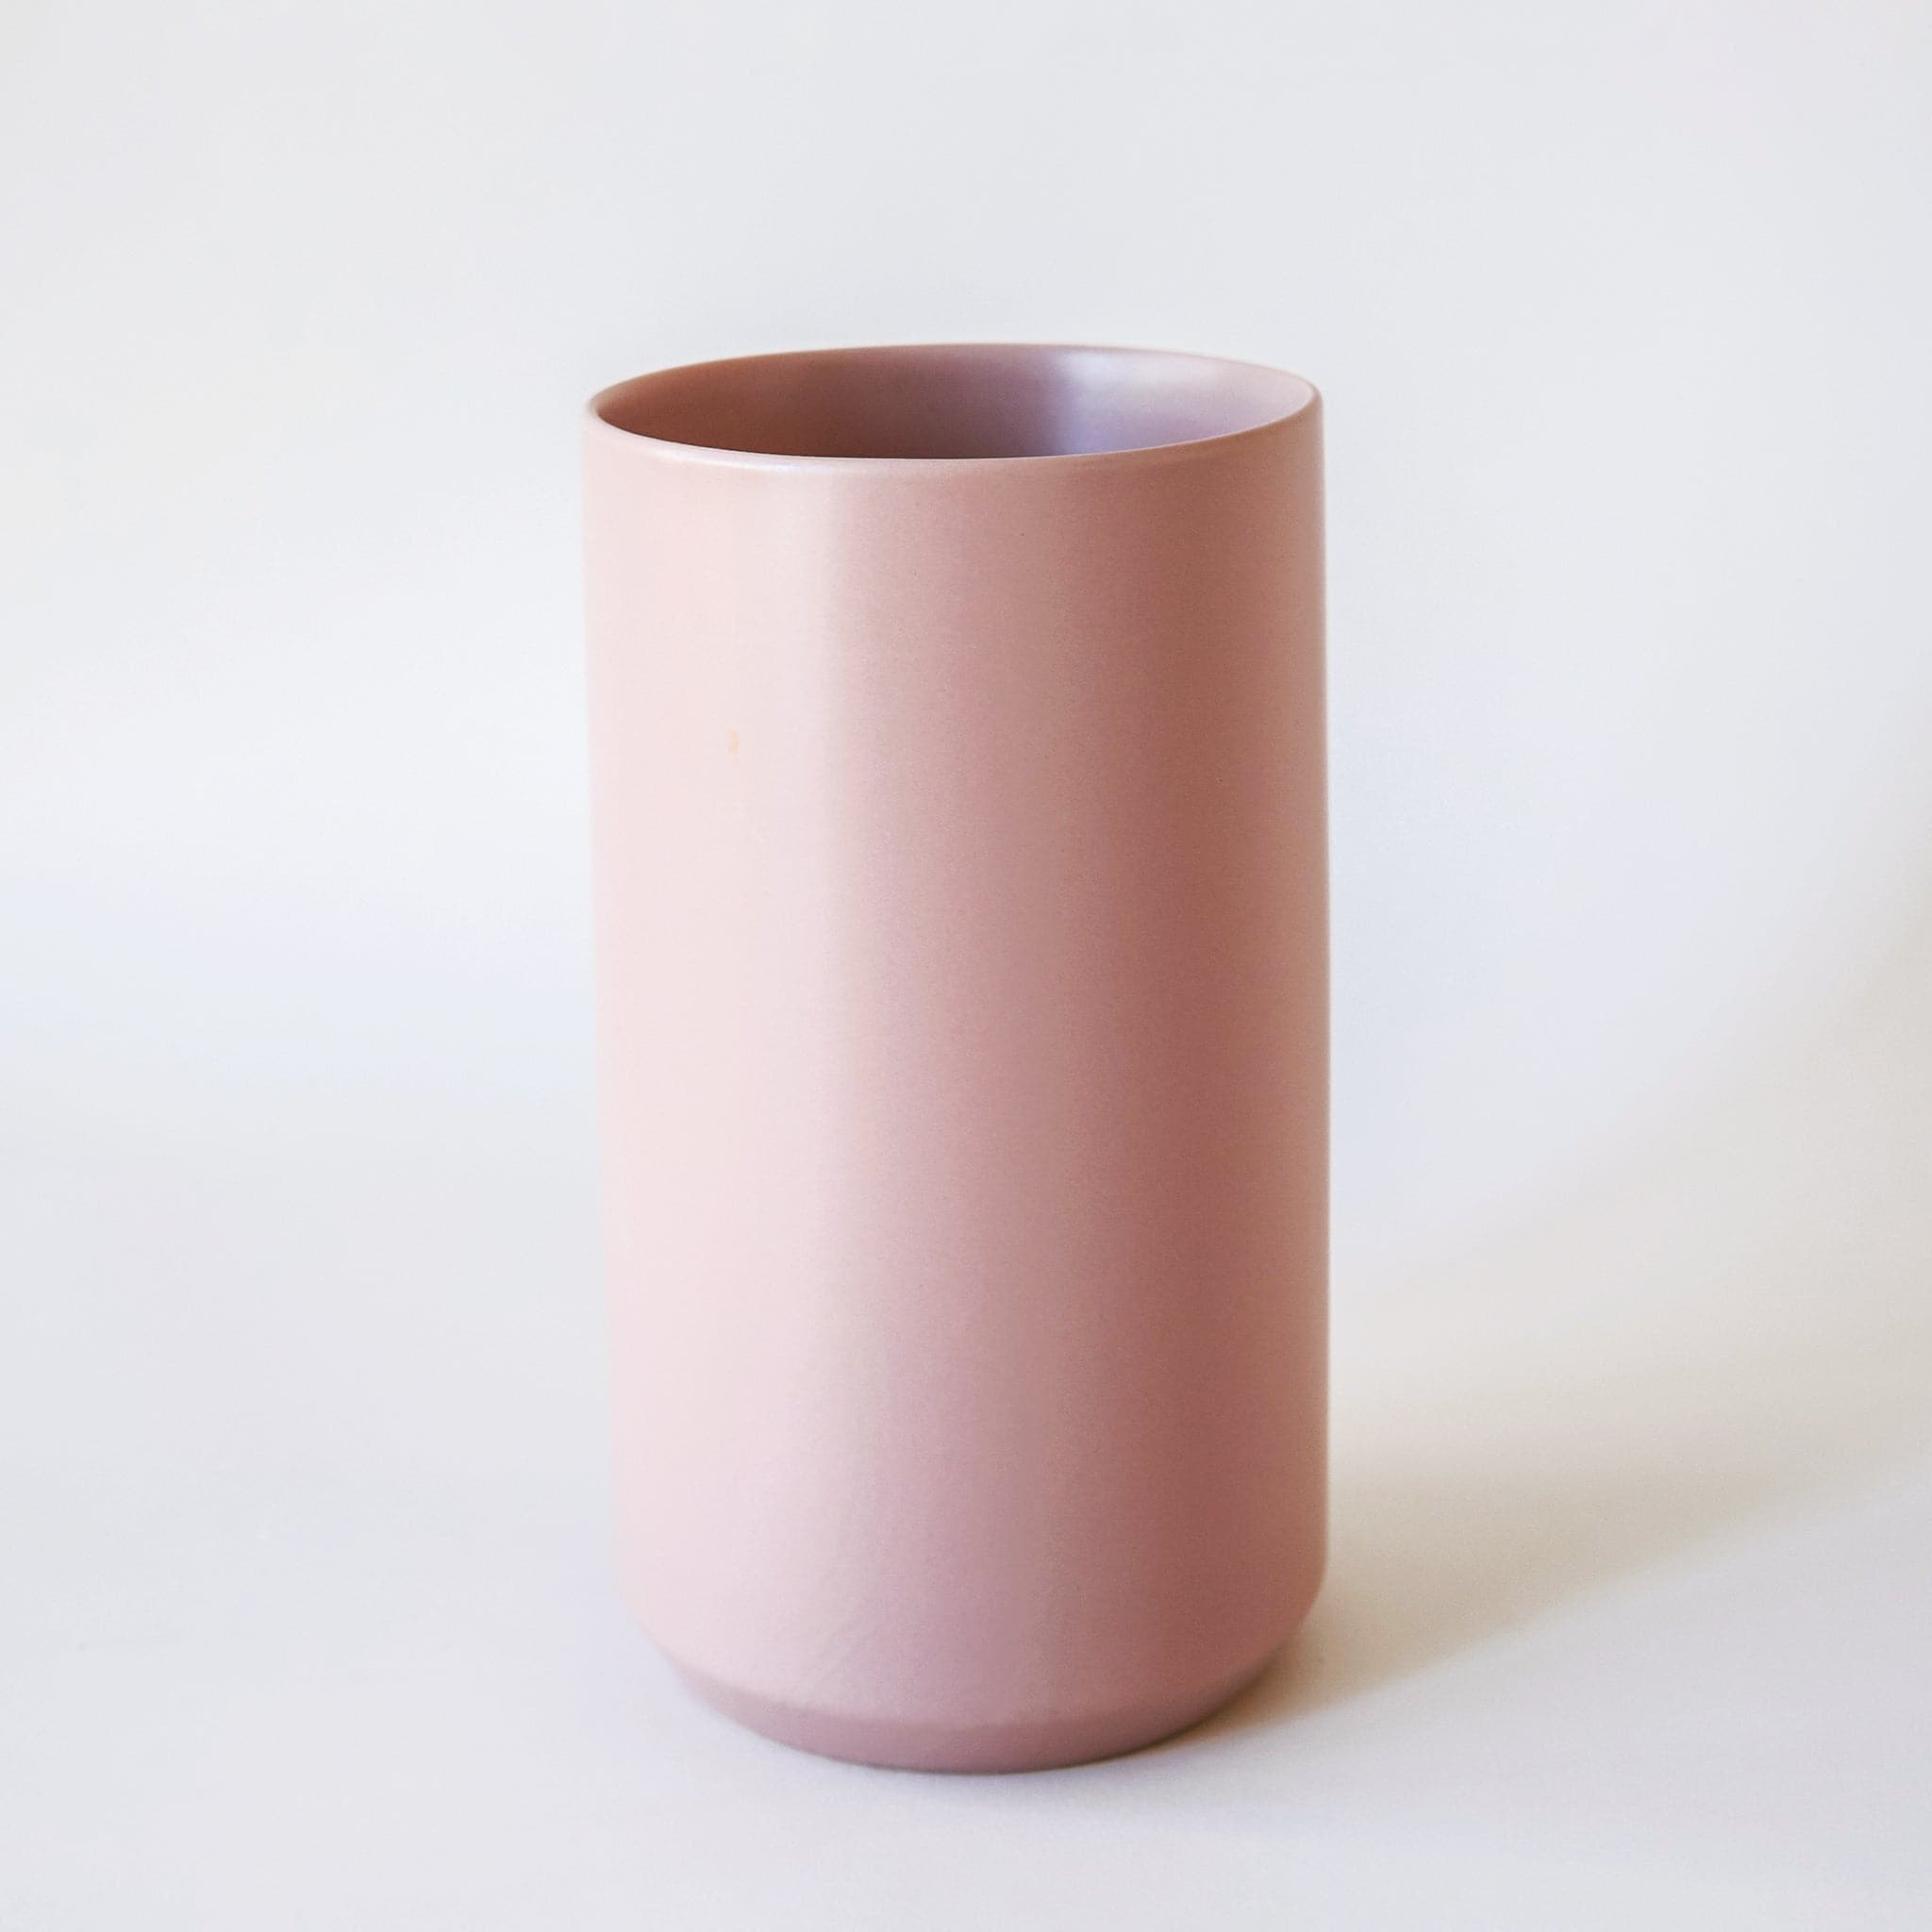 A tall, matte pink cylindrical vase.